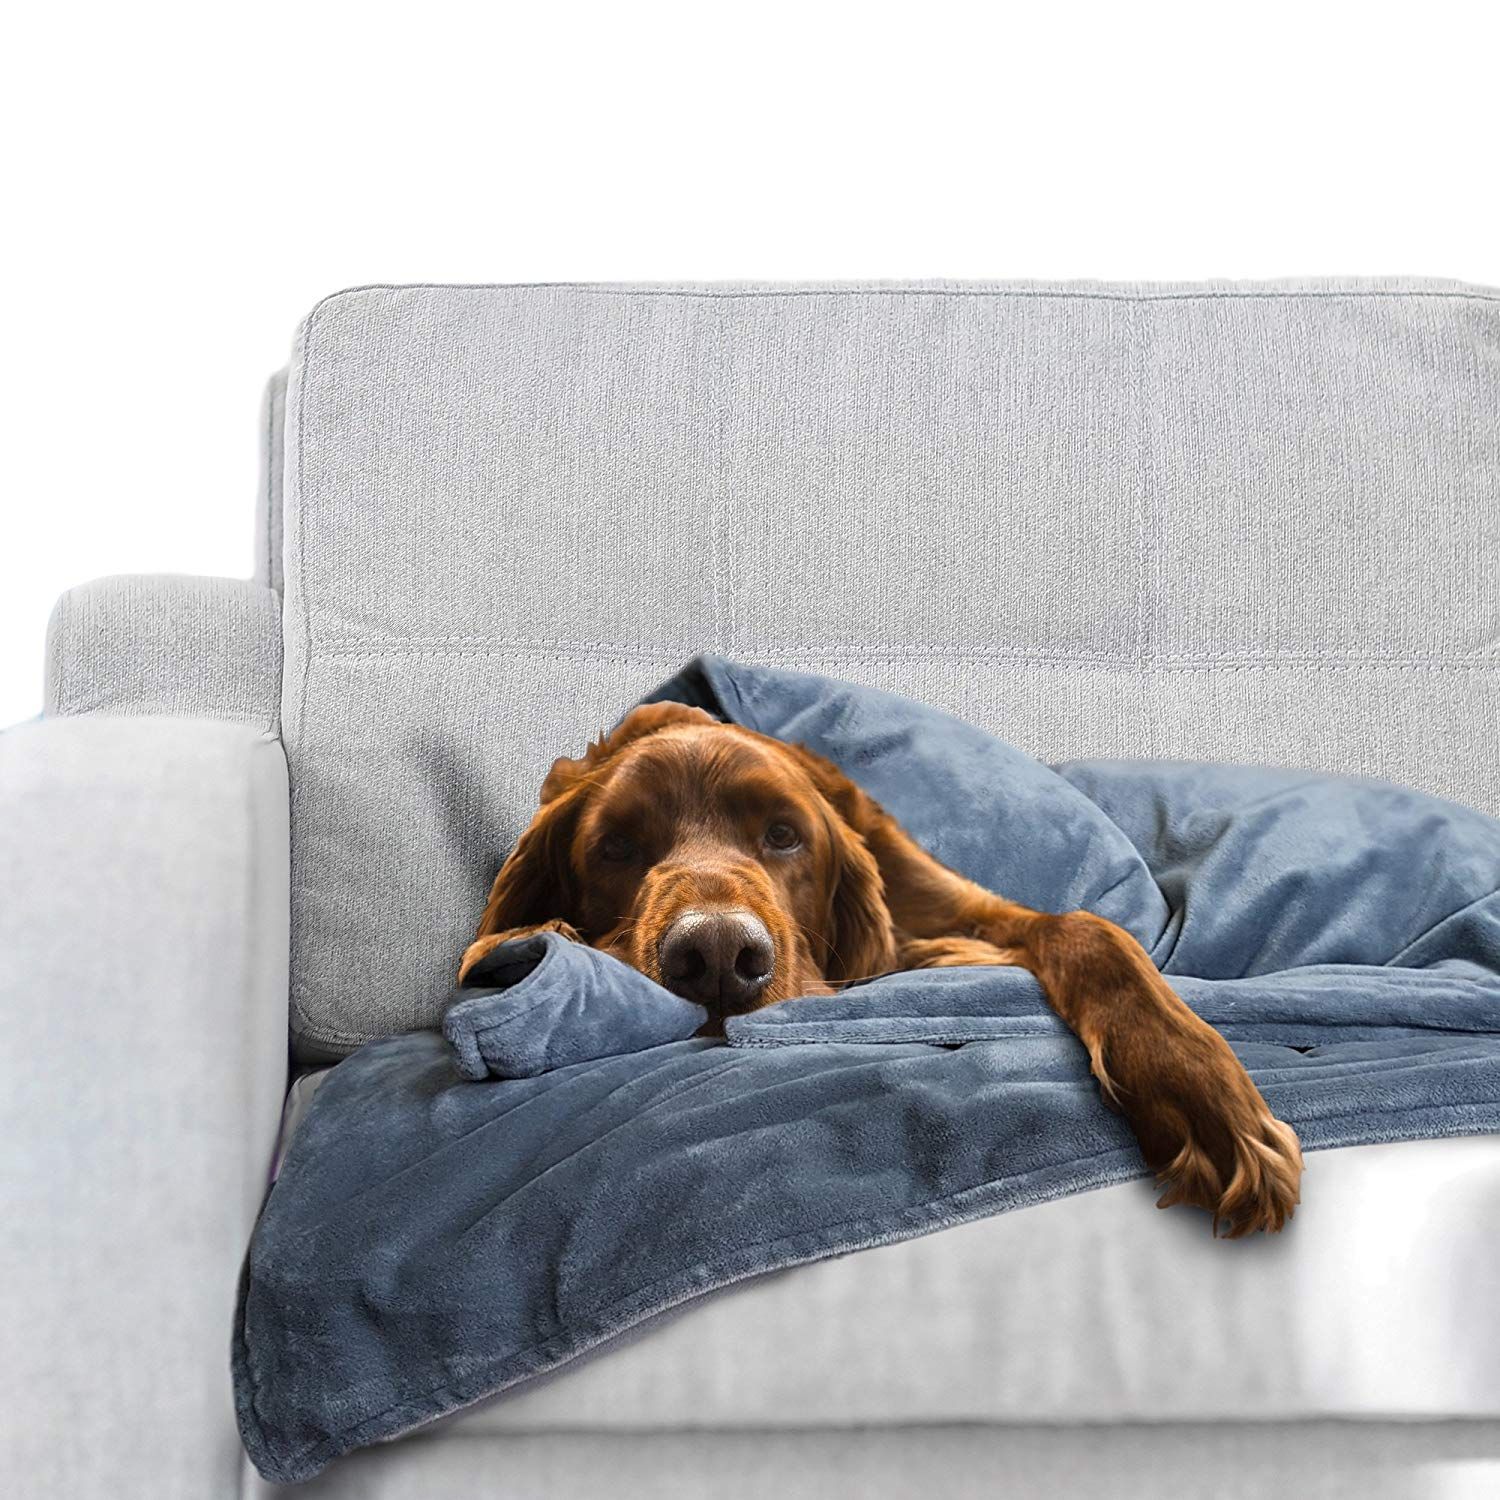 Best Weighted Blanket for Dogs on